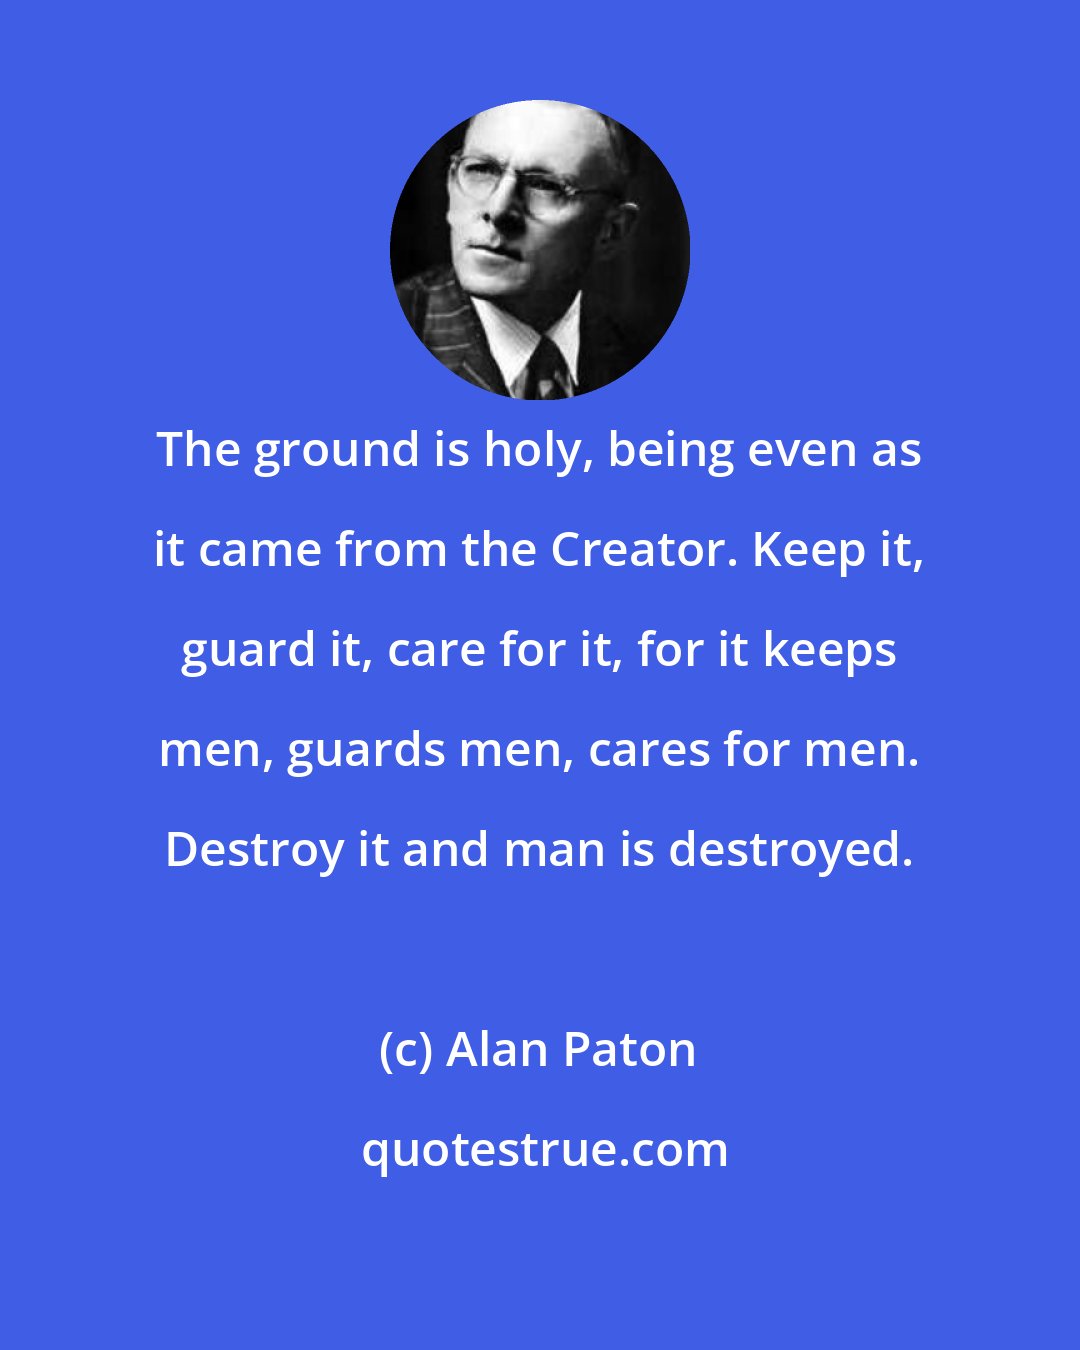 Alan Paton: The ground is holy, being even as it came from the Creator. Keep it, guard it, care for it, for it keeps men, guards men, cares for men. Destroy it and man is destroyed.